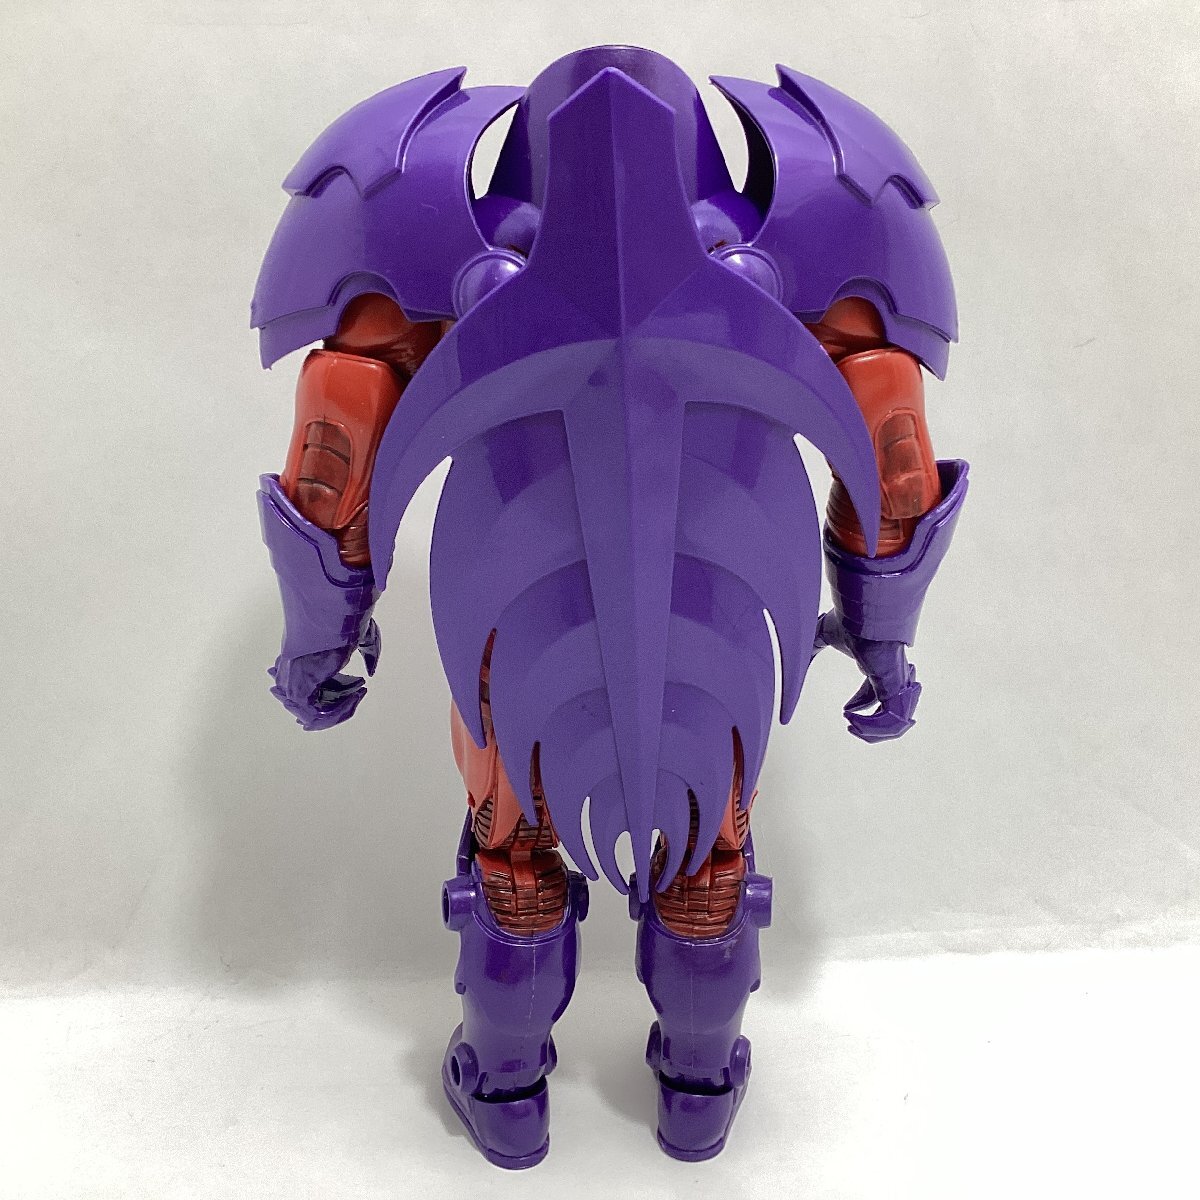  is zbroma- bell Legend red Onslaught build figure Hasbro Red Onslaught Captain America vi Ran 